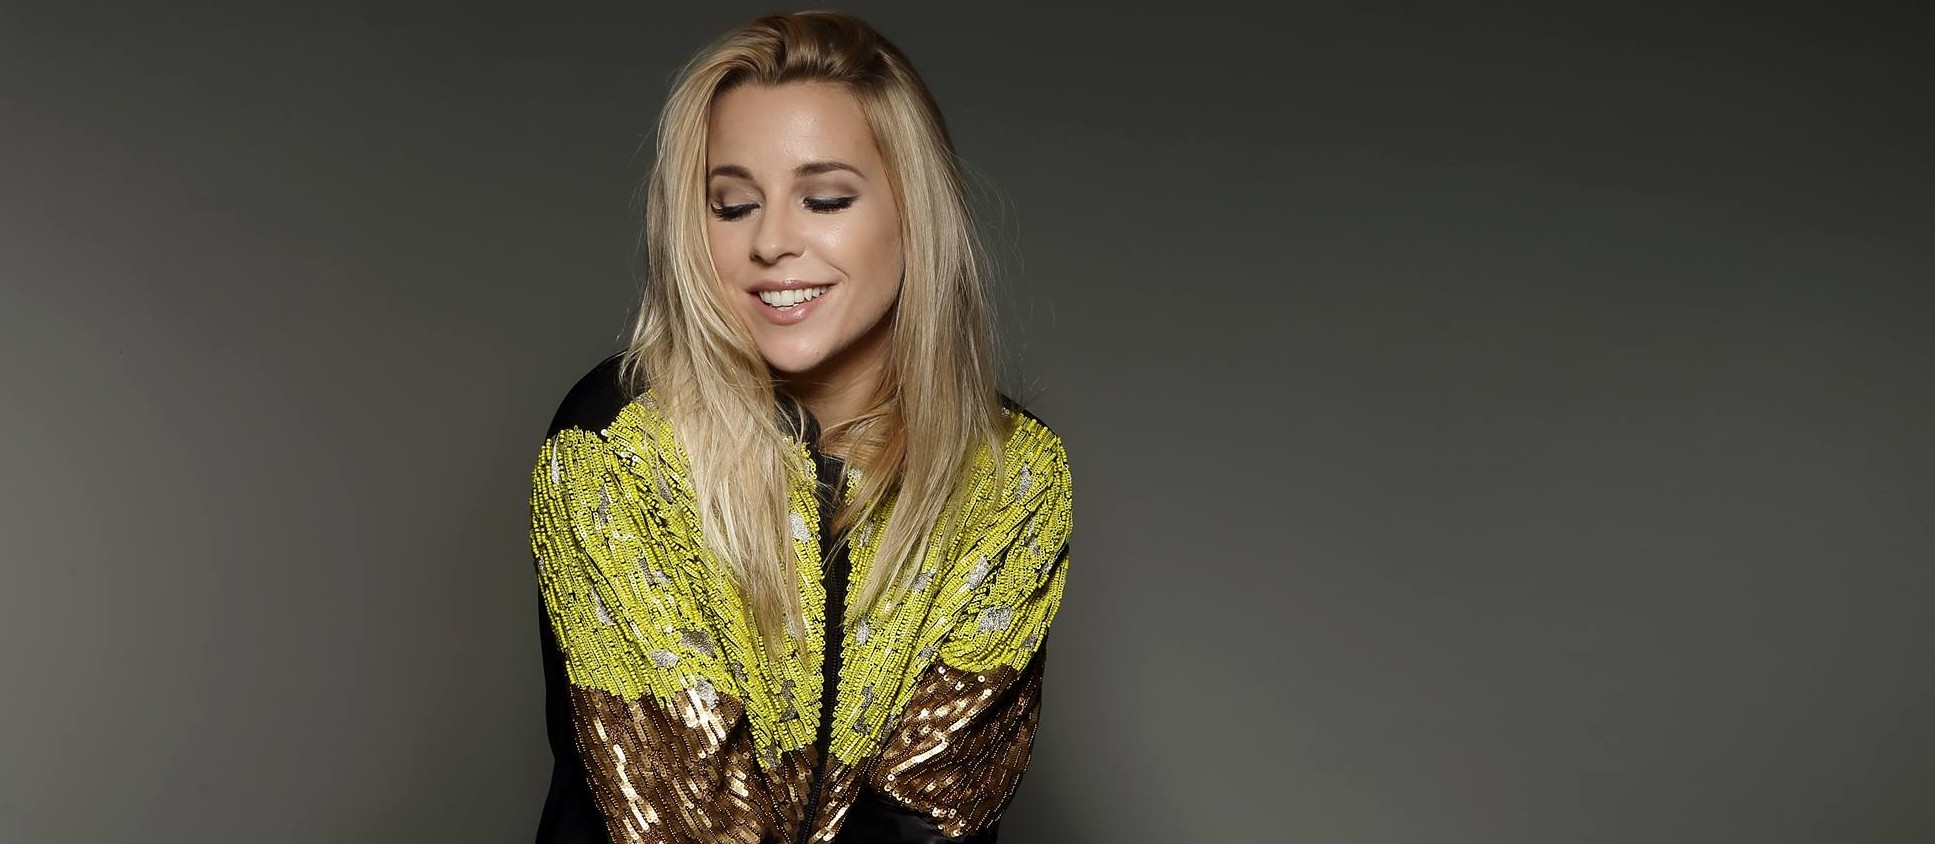 Krista Siegfrids: “Faller is an energetic pop song in Swedish about when you are falling in love” (Swedish semifinalist – Exclusive Interview)